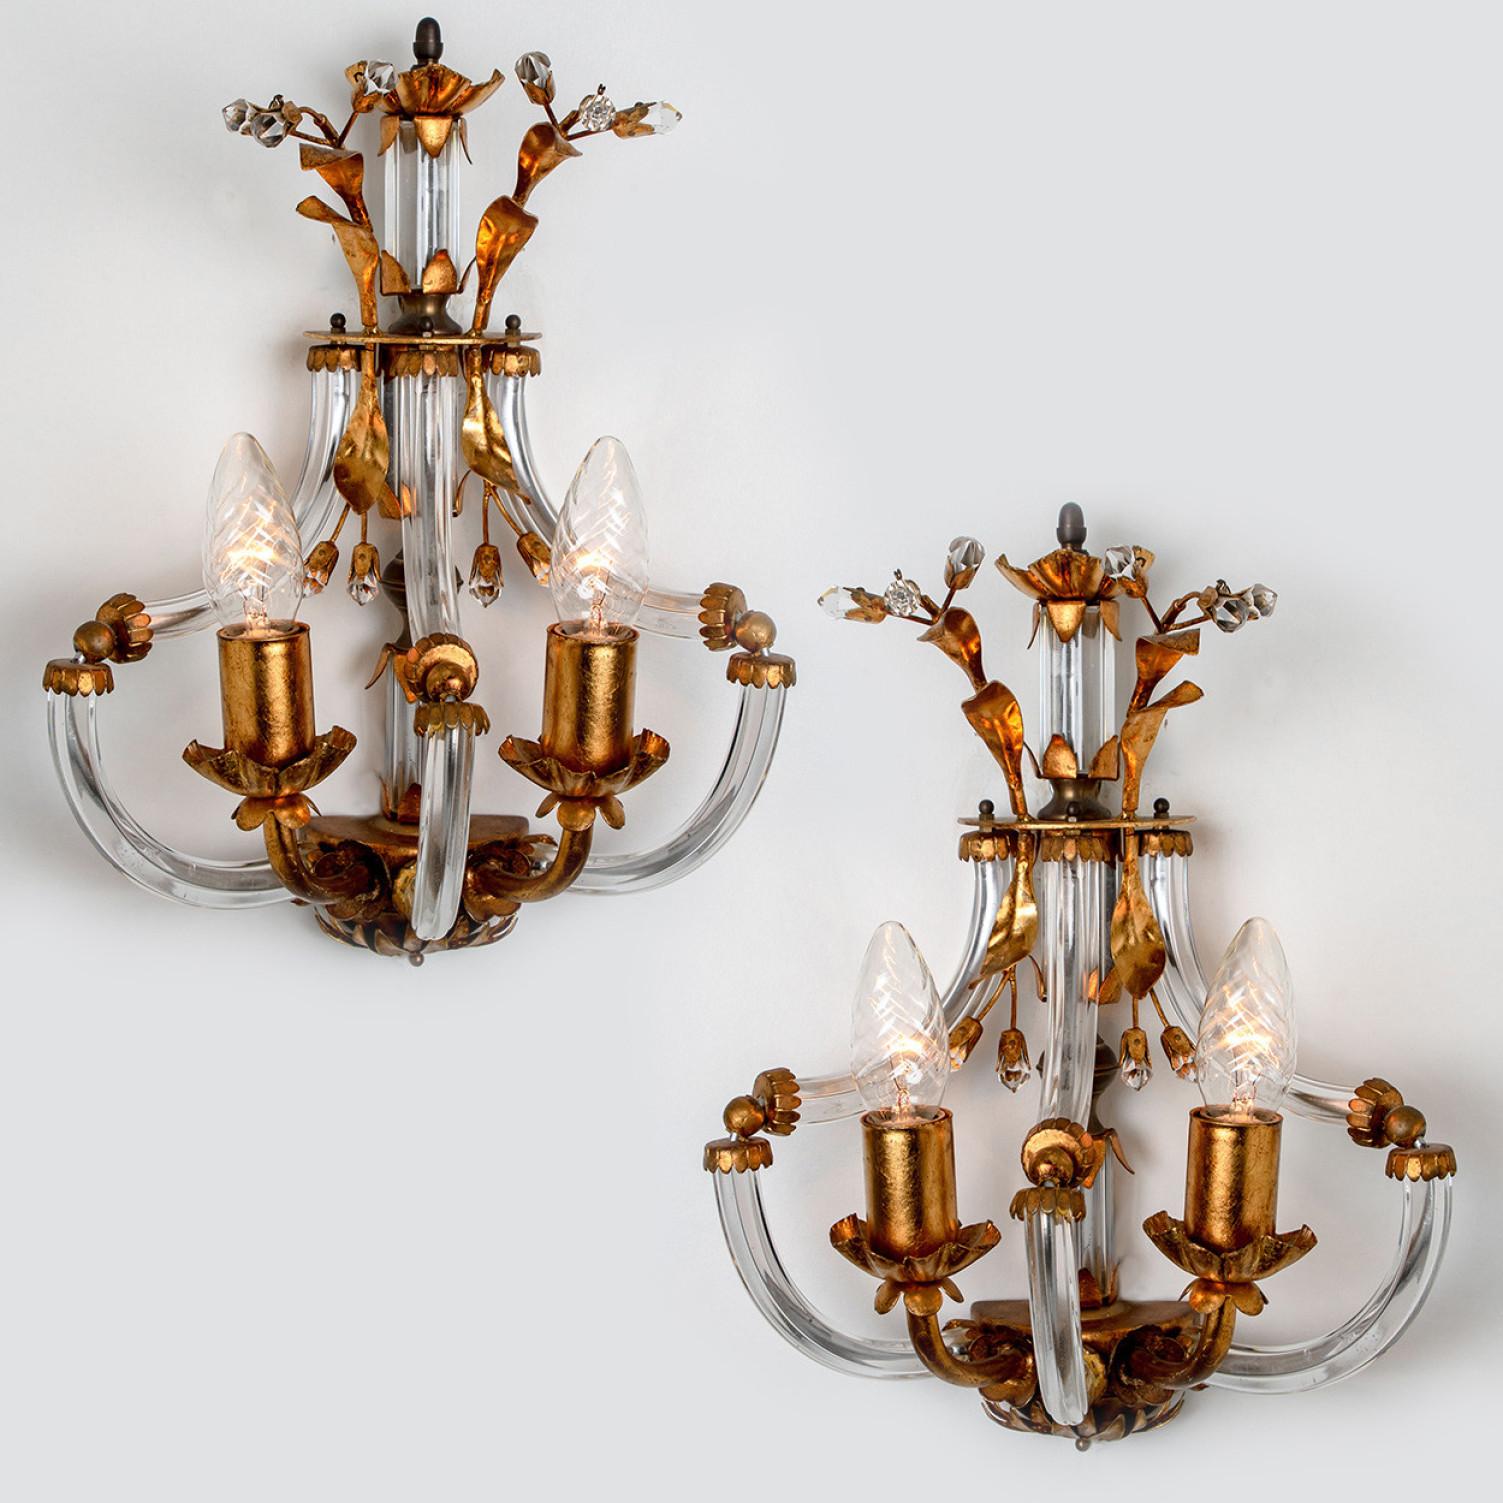 Elegant crystal glass and brass wall lights by Palwa, Germany. Wonderful light effect due to lovely glass elements.

Measures: Width 9.84 inch (25 cm) x Height 15.75 inch (40 cm) x Depth 6.3 inch (16 cm)
We also have a matching chandelier available.